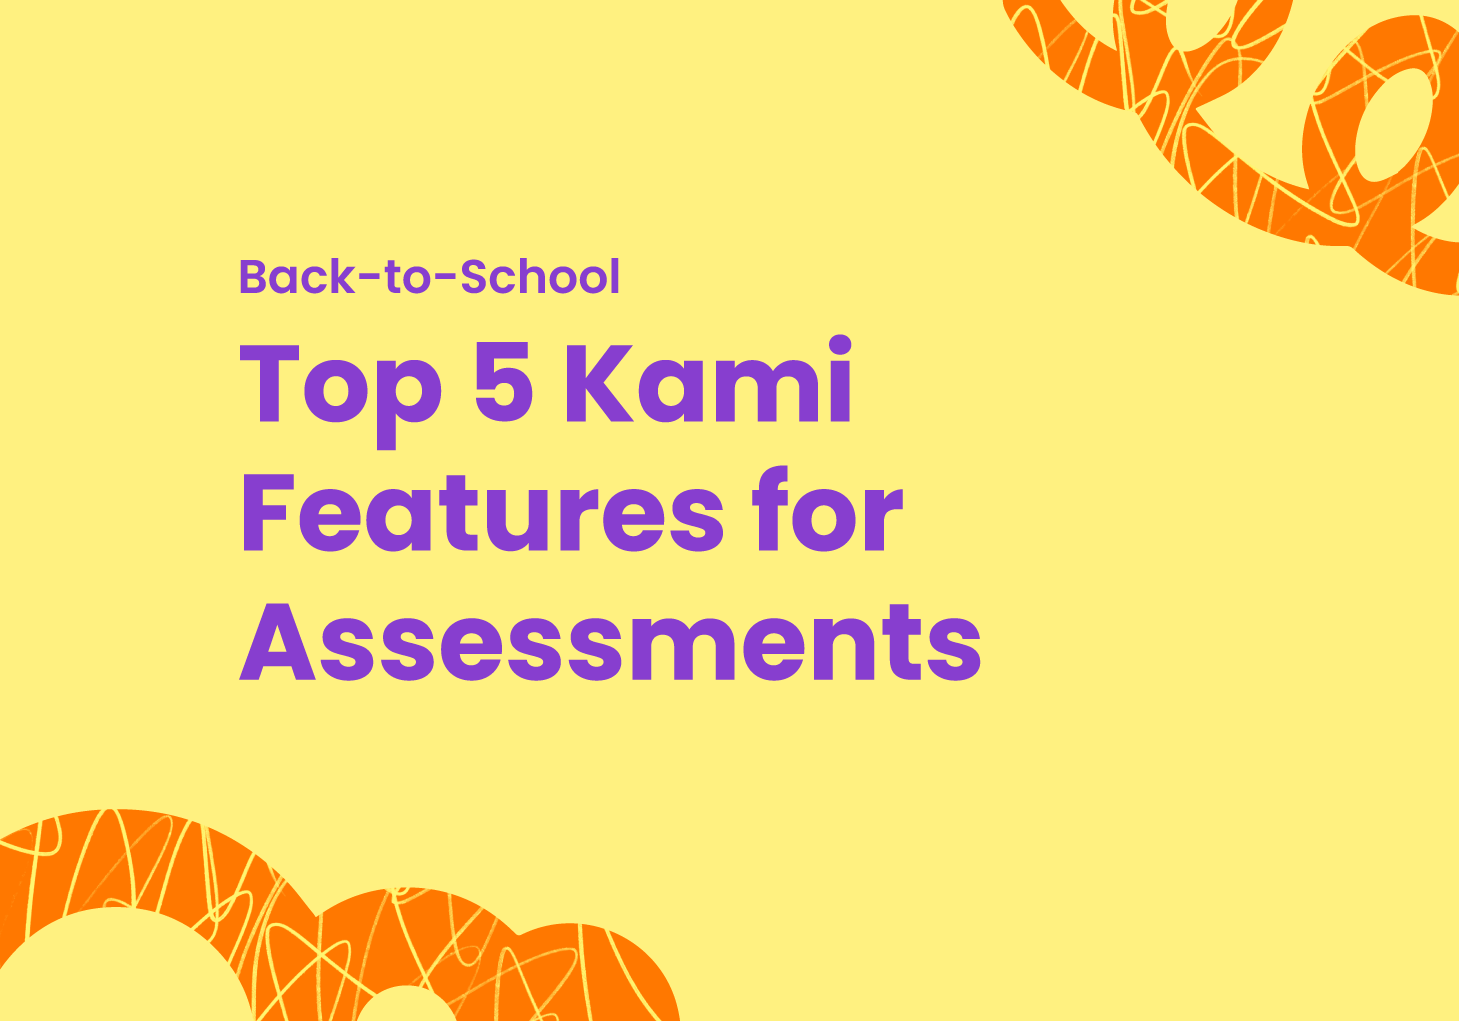 Back-to-School: Top 5 Kami Features for Assessments